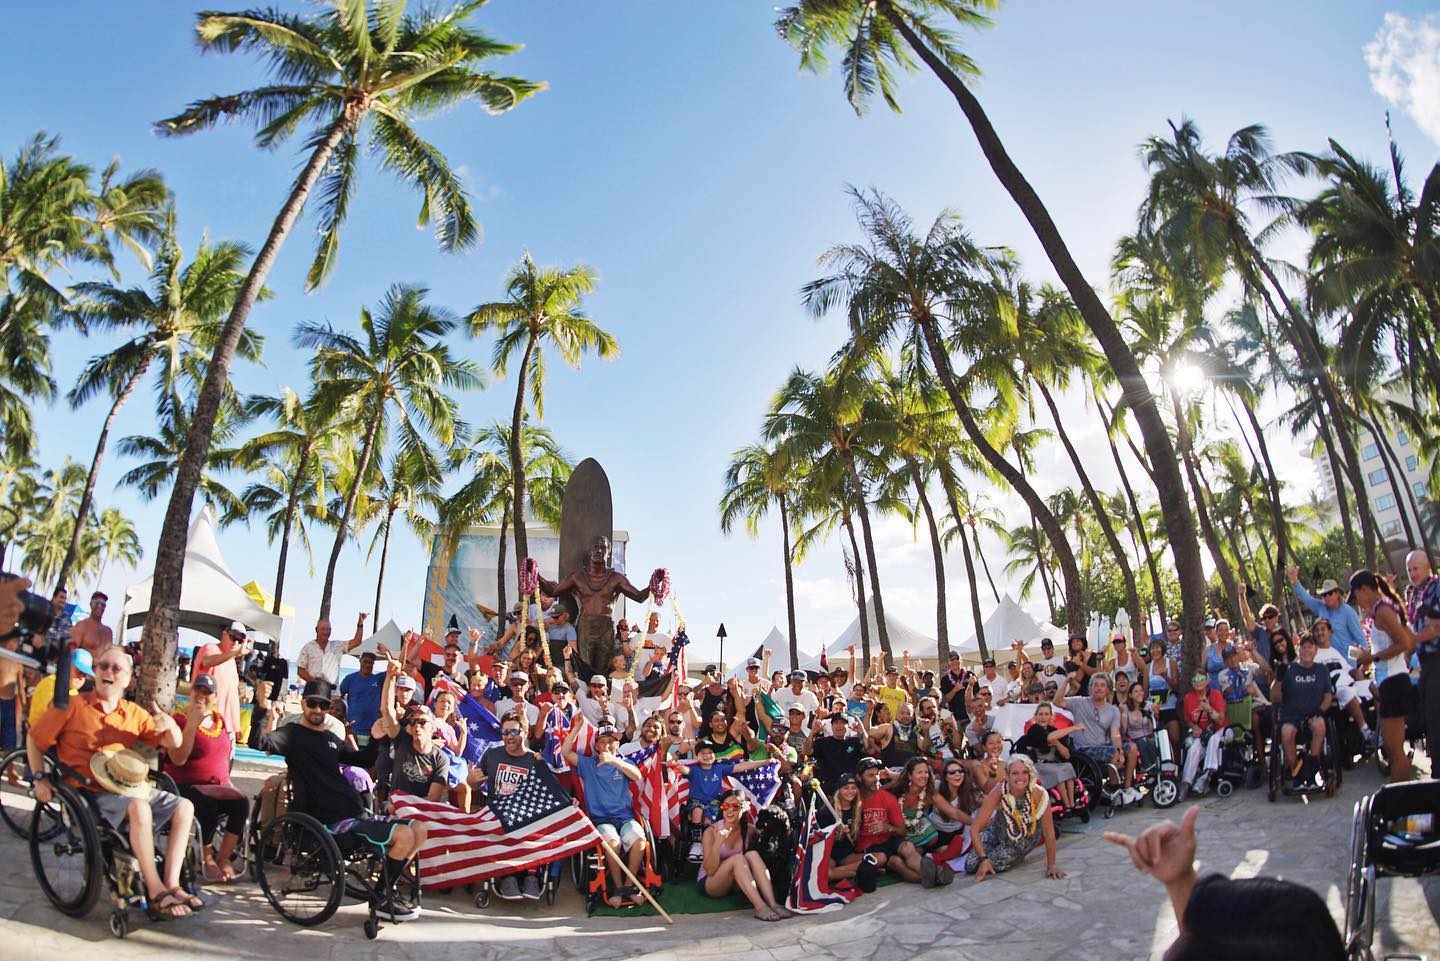 YOU COULD  HAVE YOUR VERY OWN HAWAII ADAPTIVE SURFING COMPETITION!